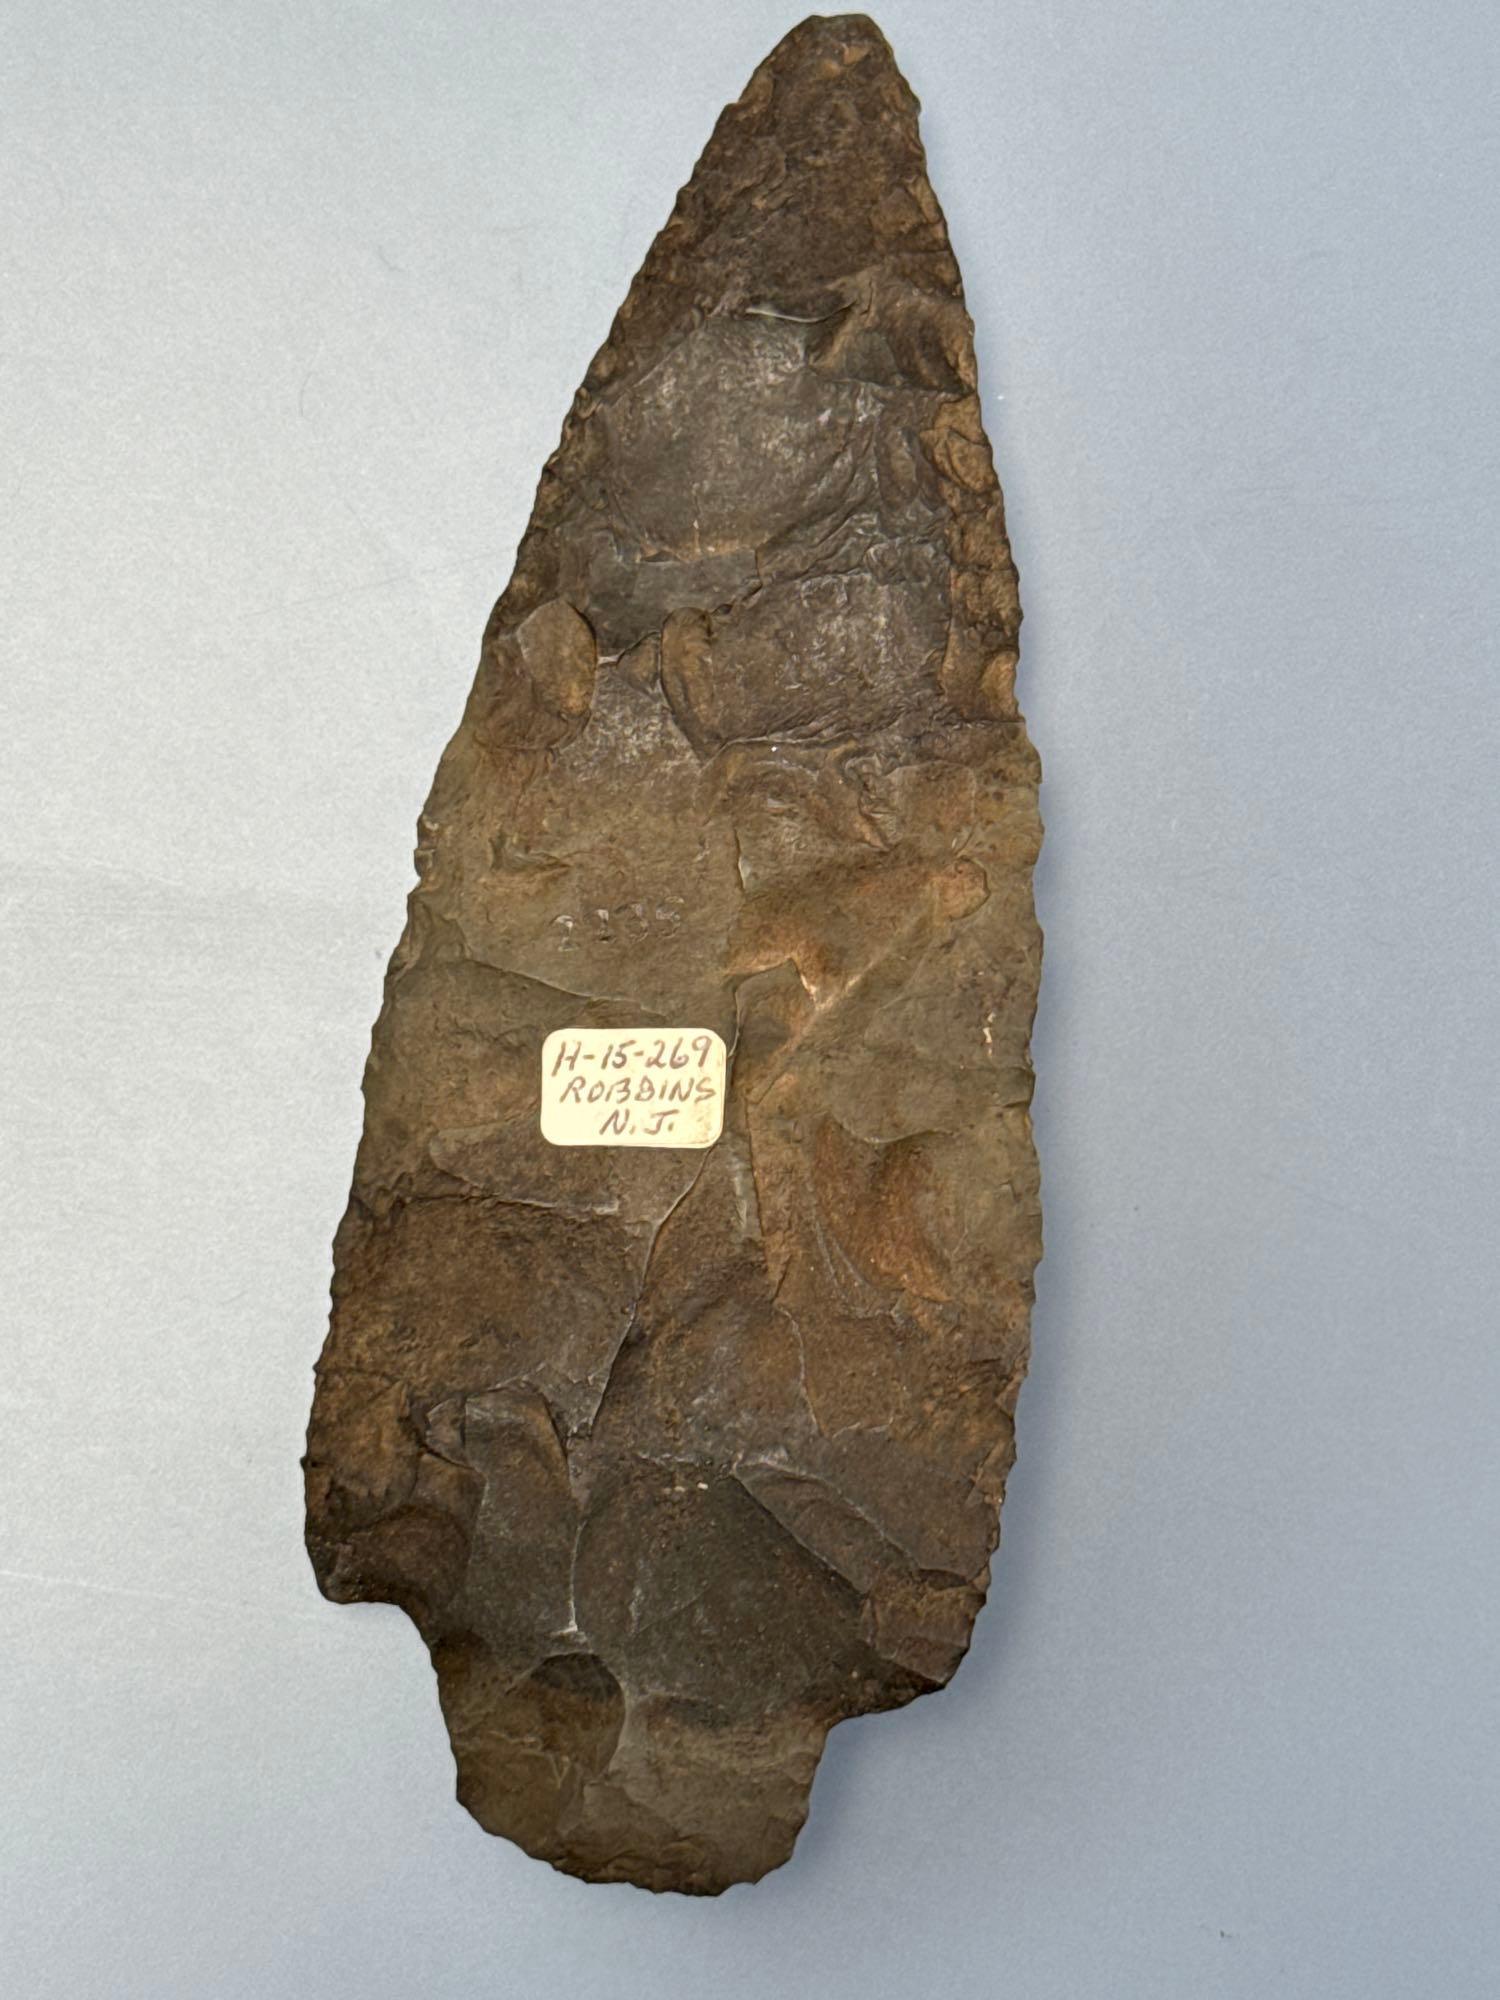 XL 5 3/16" Multi-Colored Chert Adena Point, Found in New Jersey, Great Example and LARGE